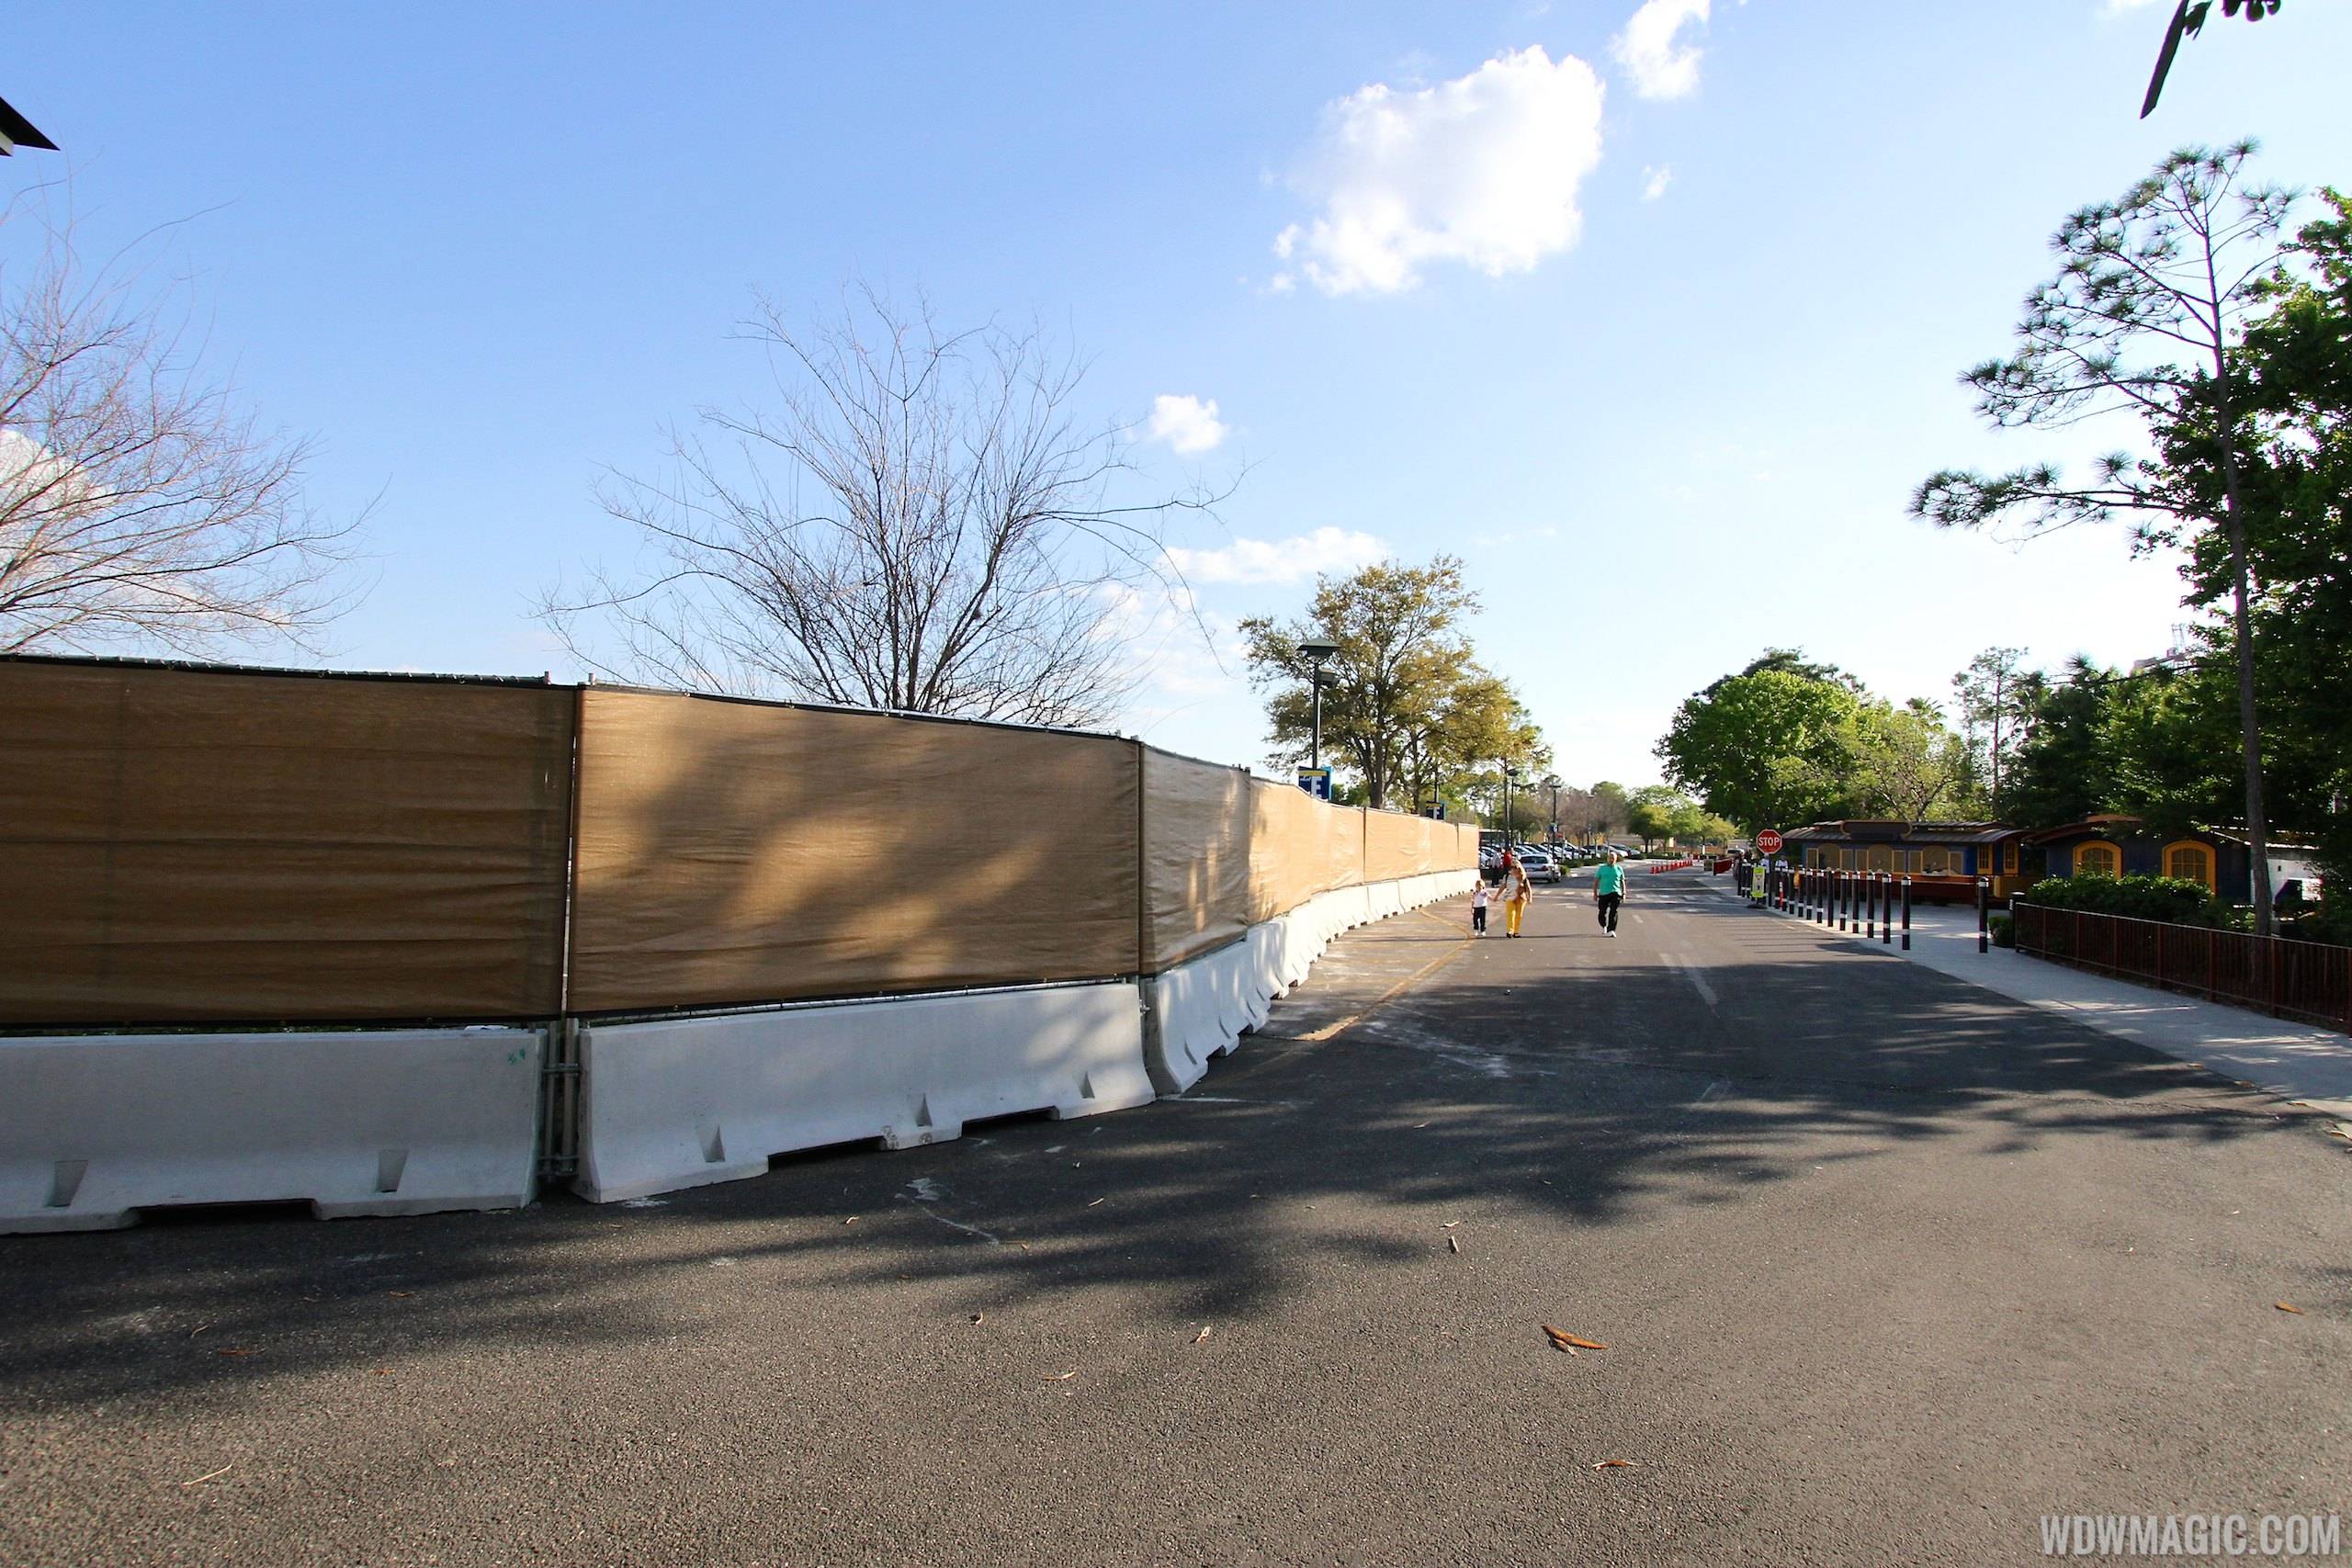 PHOTOS - Construction walls up around the now closed Pollo Campero and parking lots E,F,G